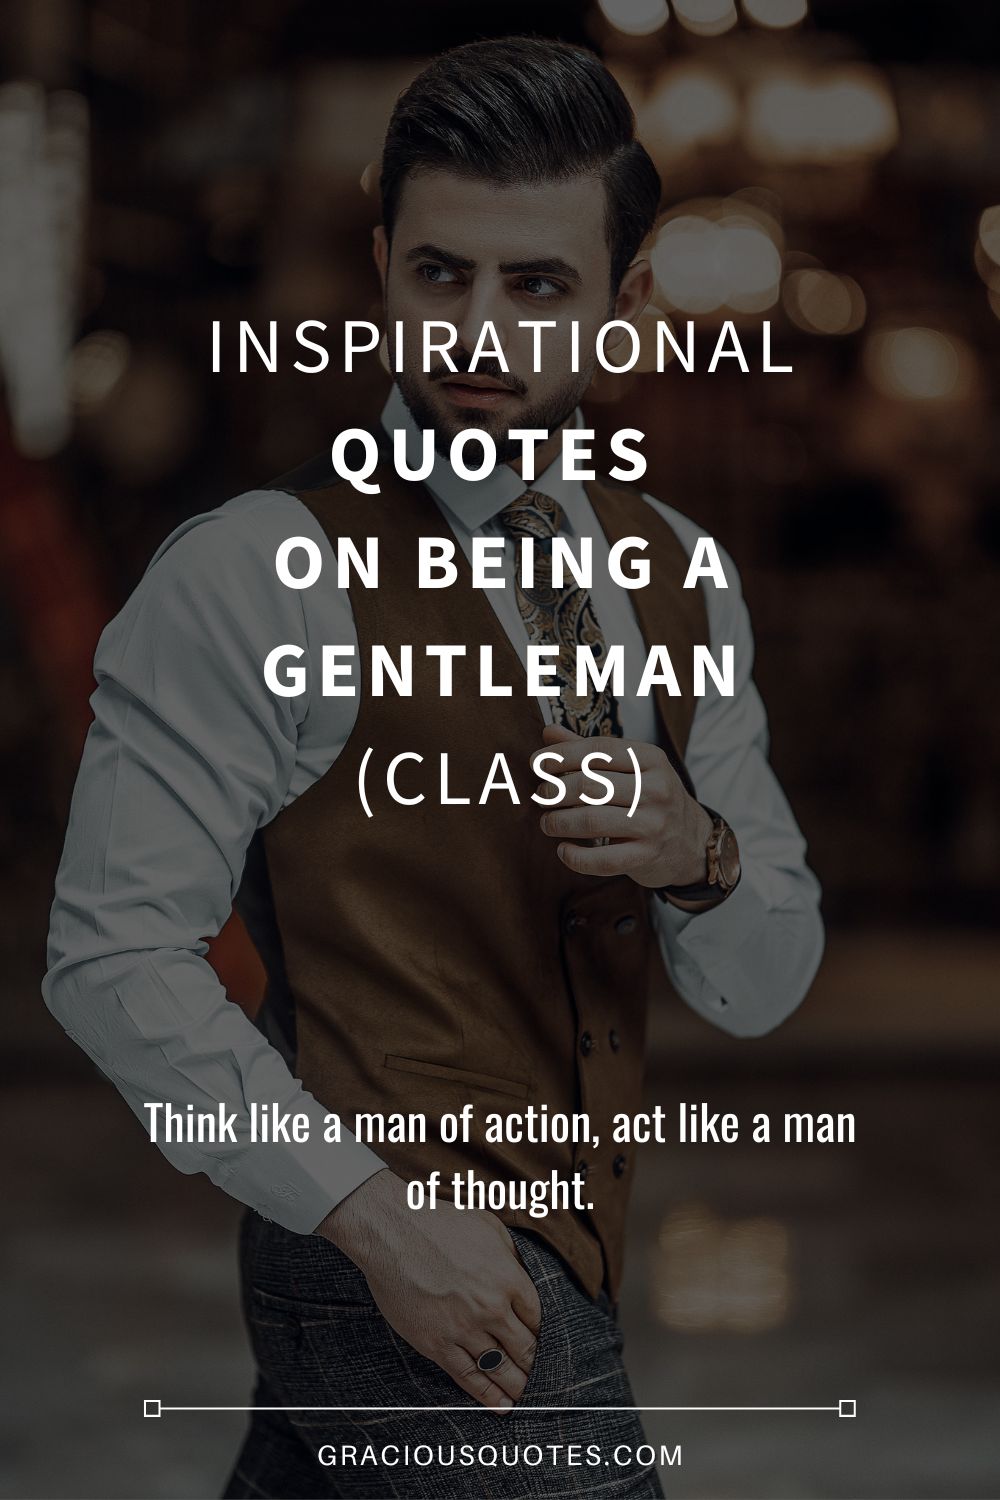 Inspirational Quotes on Being a Gentleman (CLASS) - Gracious Quotes